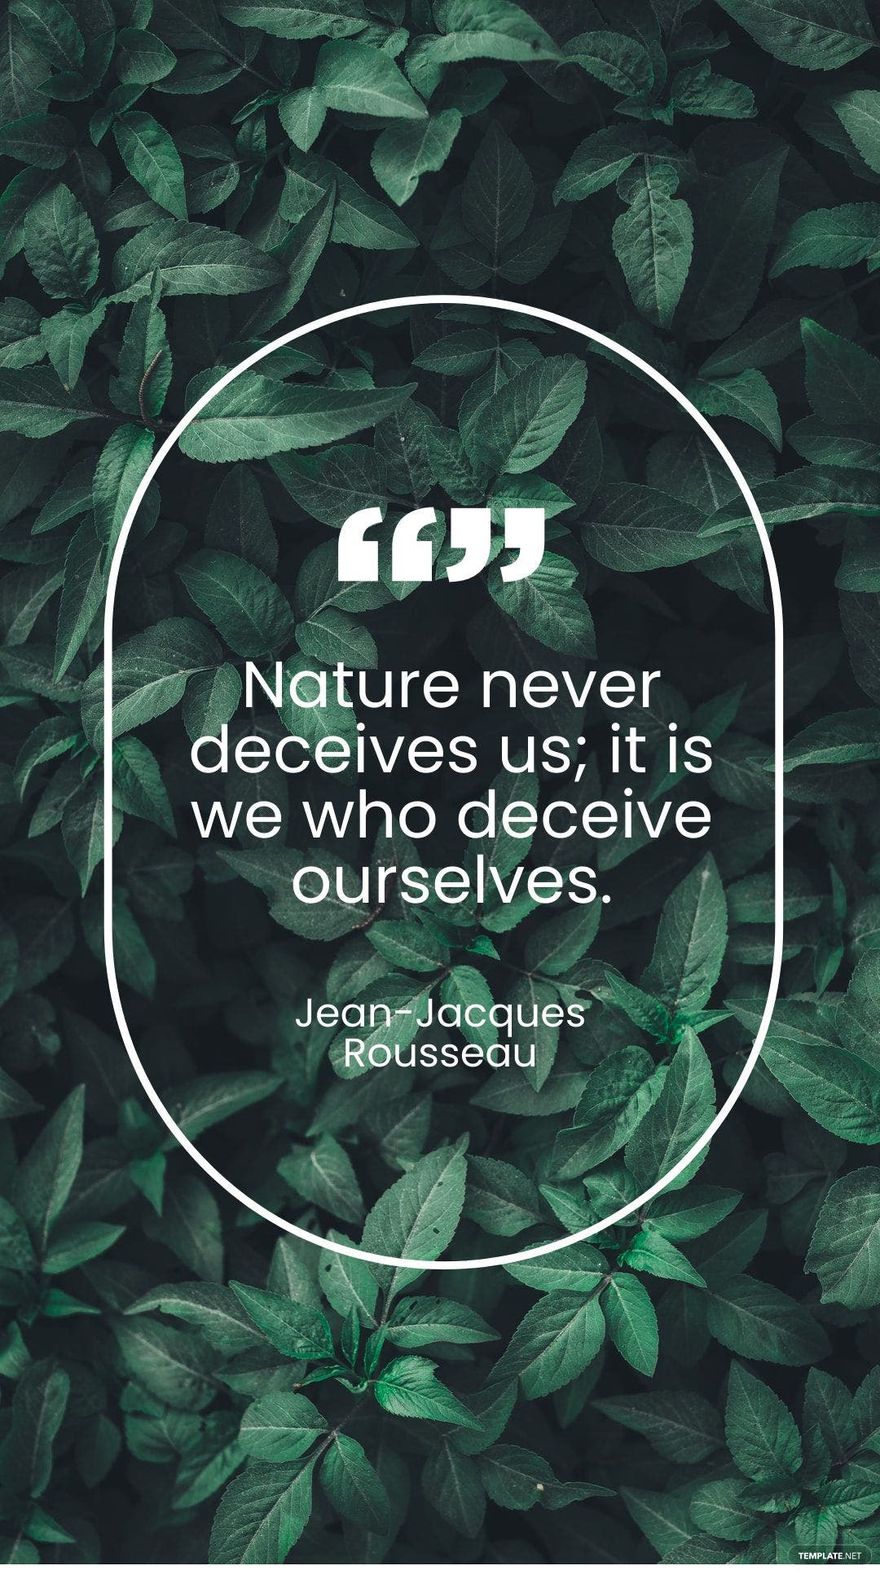 Jean-Jacques Rousseau - Nature never deceives us; it is we who deceive ourselves. in JPG